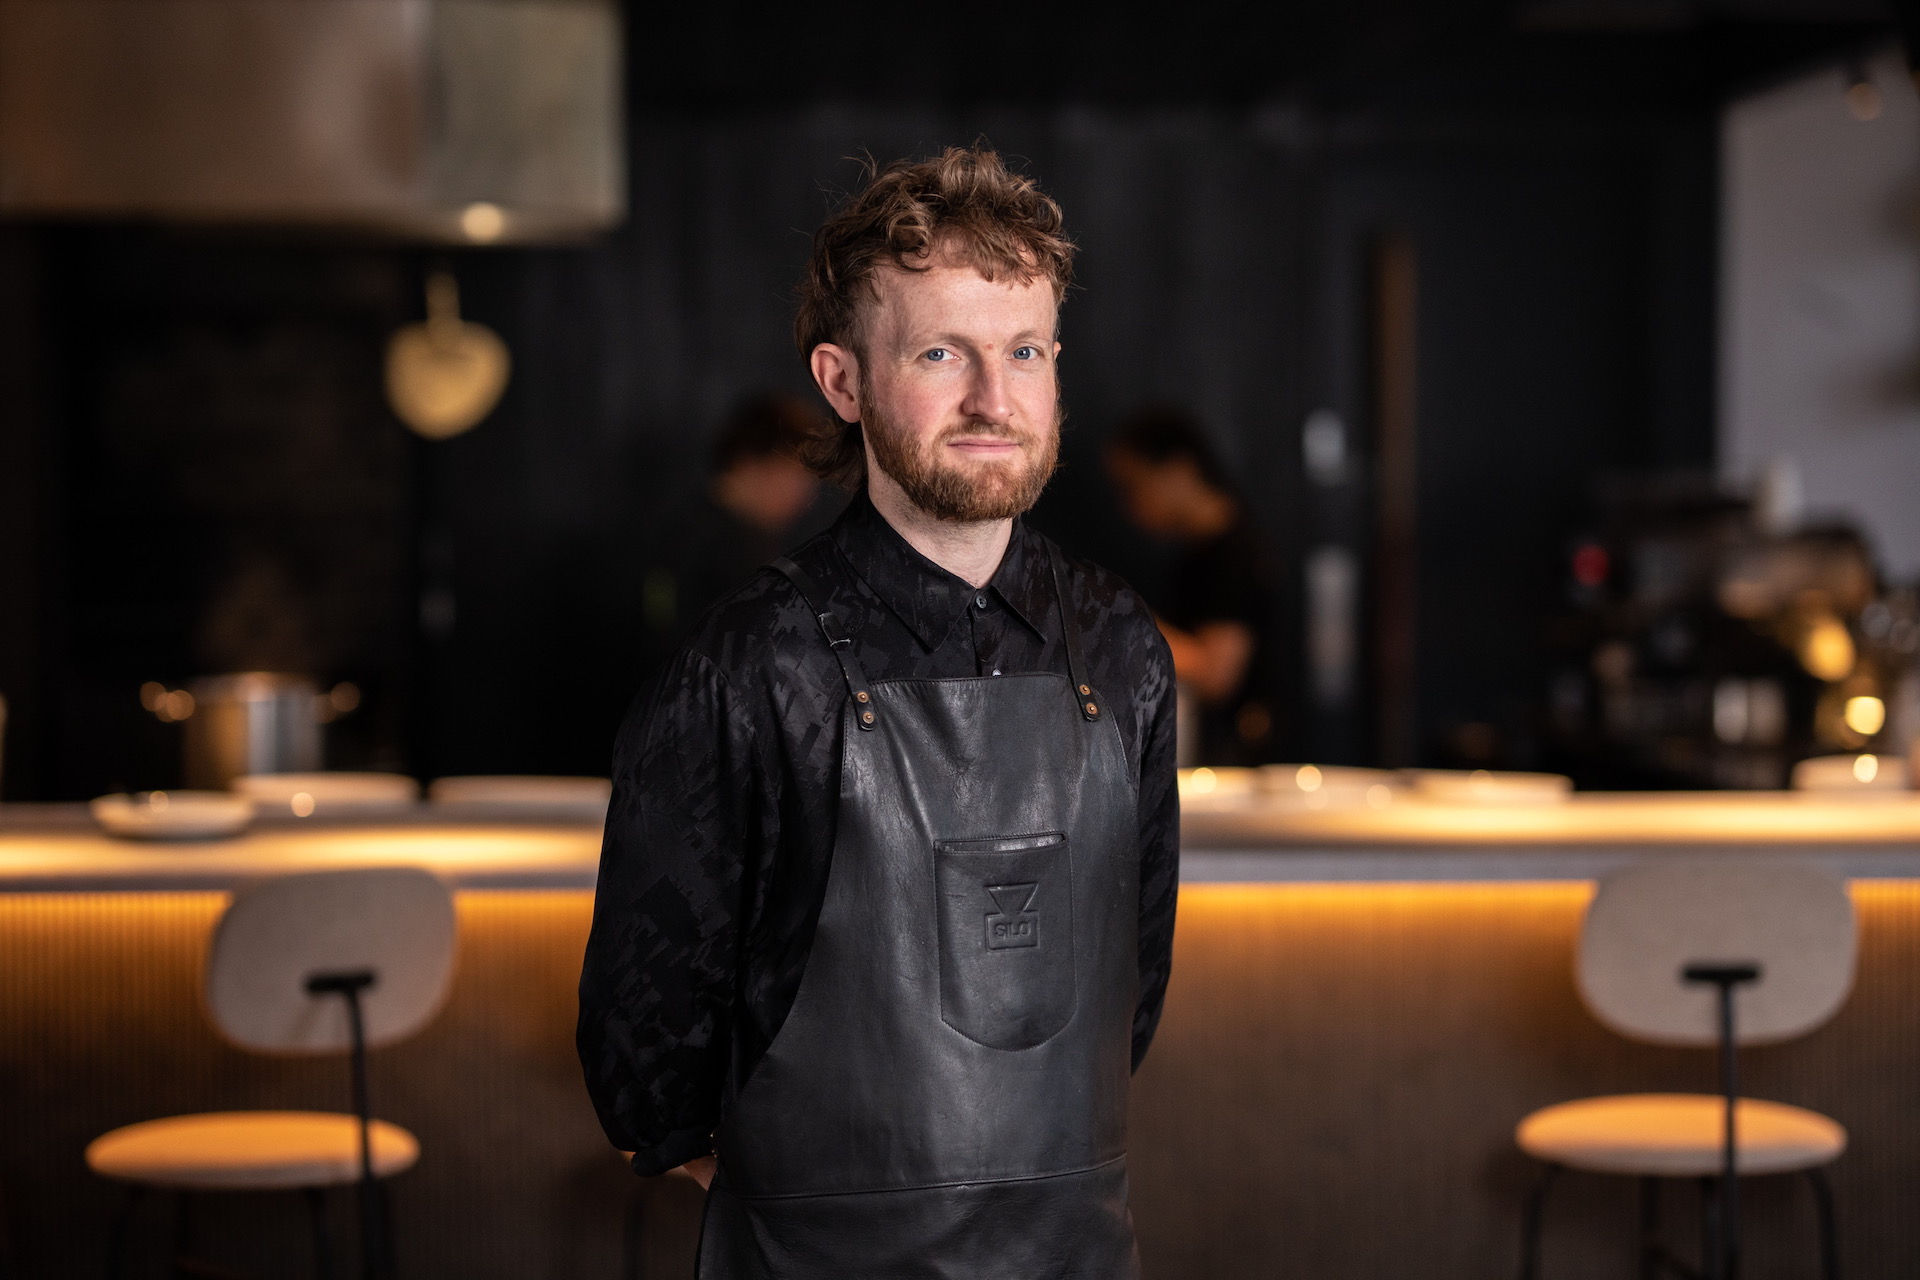 Portrait of Douglas McMaster, chef and founder of Silo London